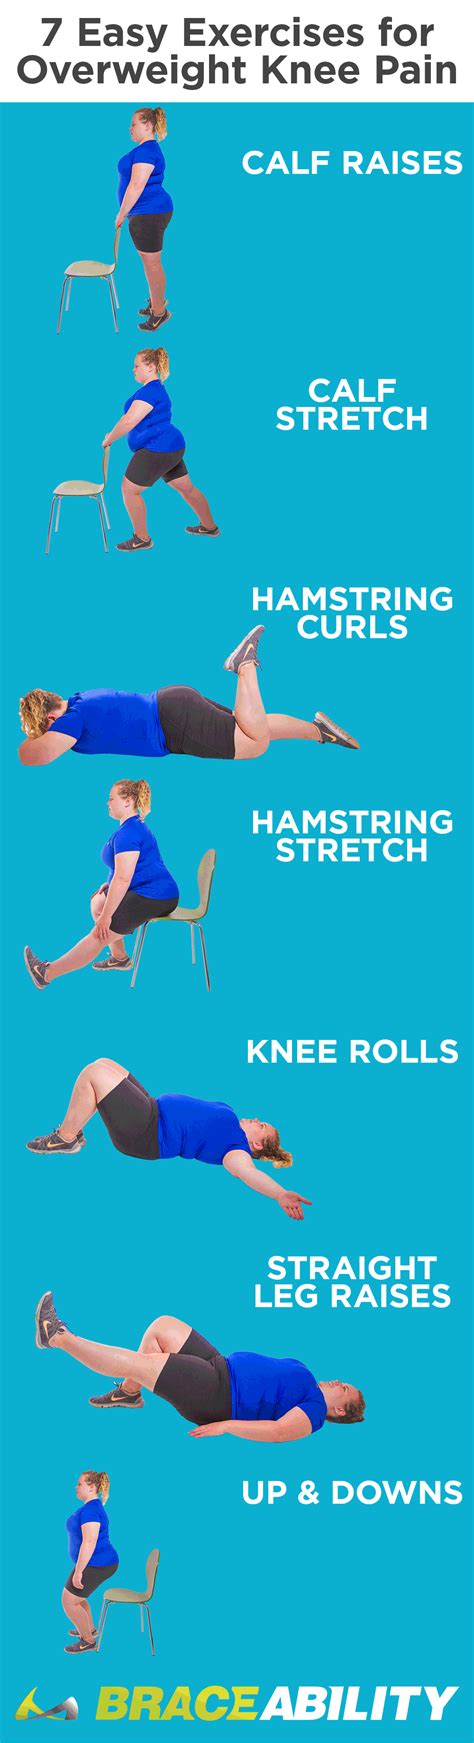 Pin On Knee Pain Relief Exercises Stretches And Yoga To Help Knee